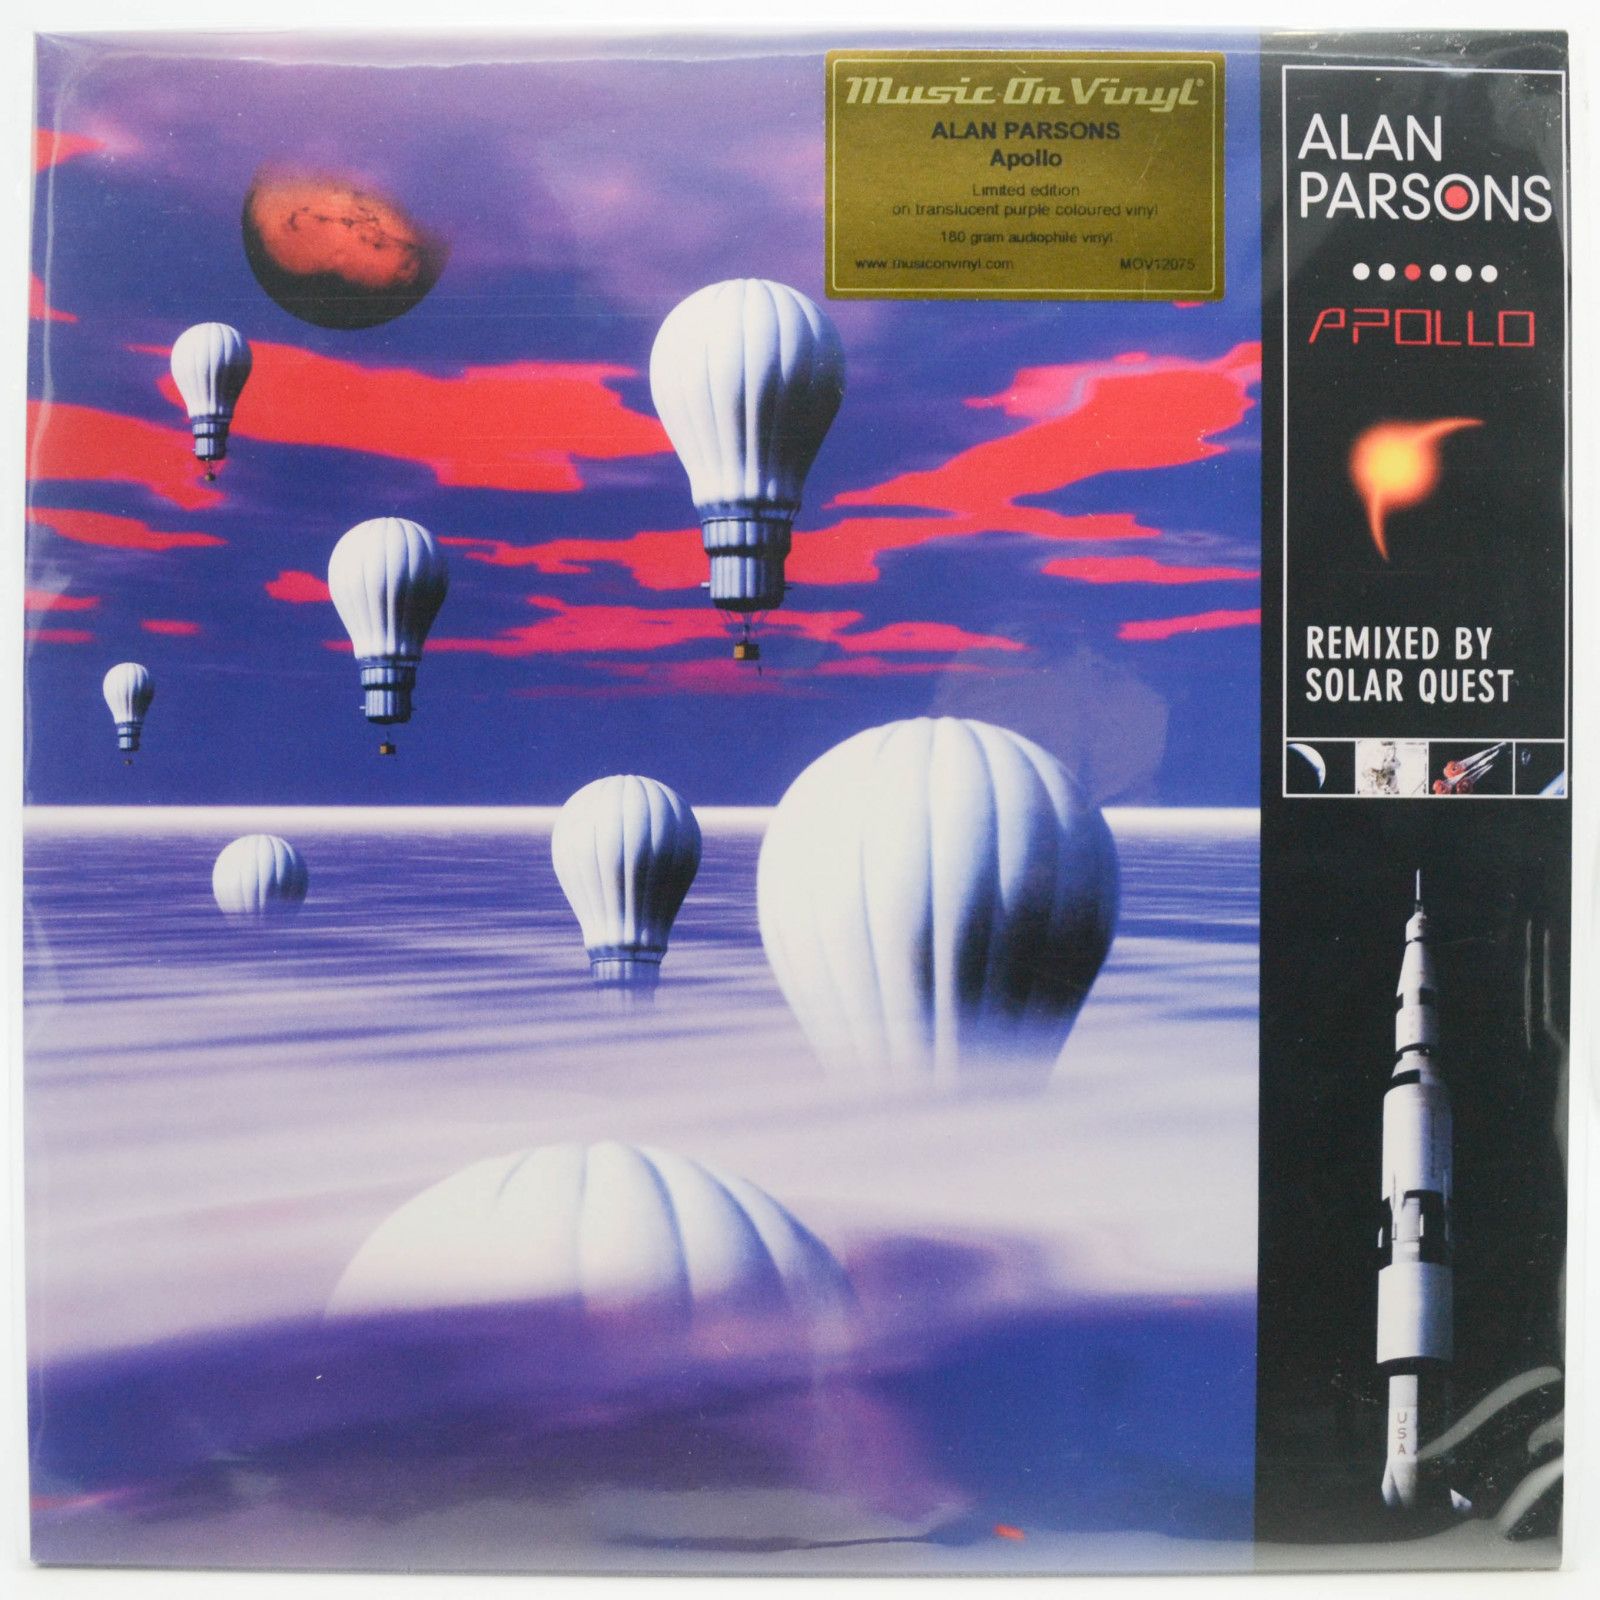 Alan Parsons — Apollo (Remixed By Solar Quest), 1996